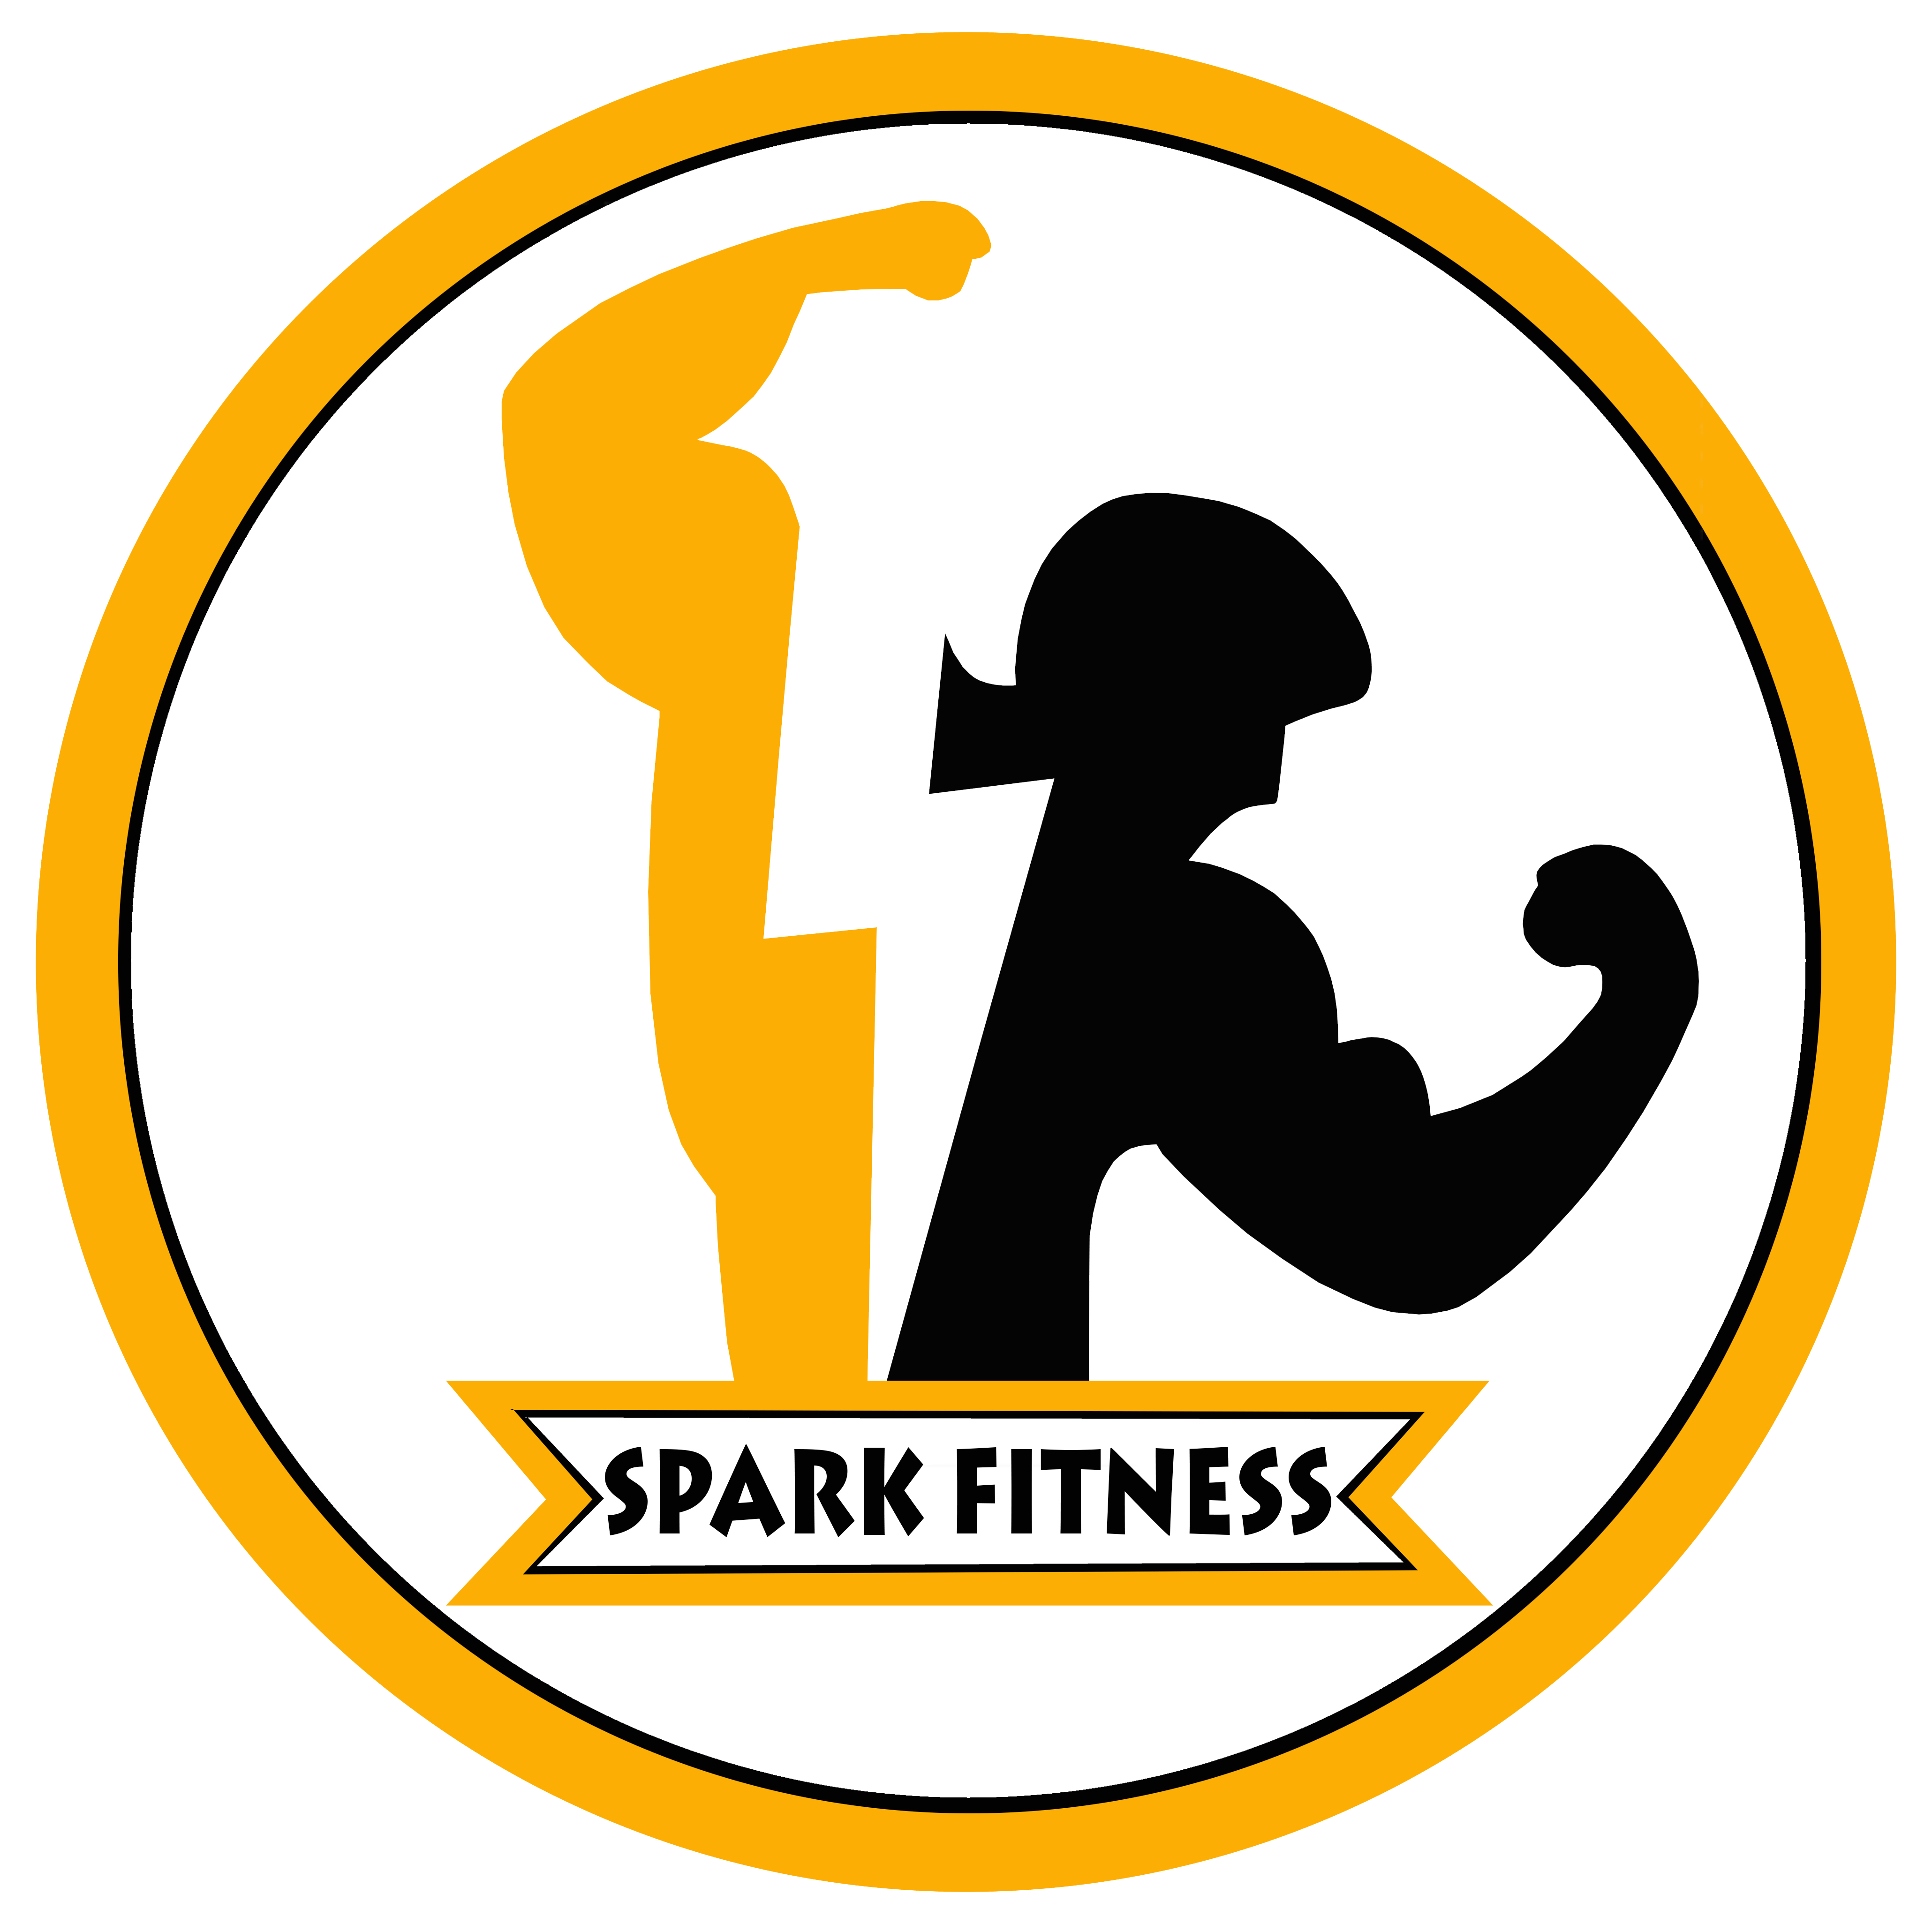 SPARK FITNESS|Gym and Fitness Centre|Active Life